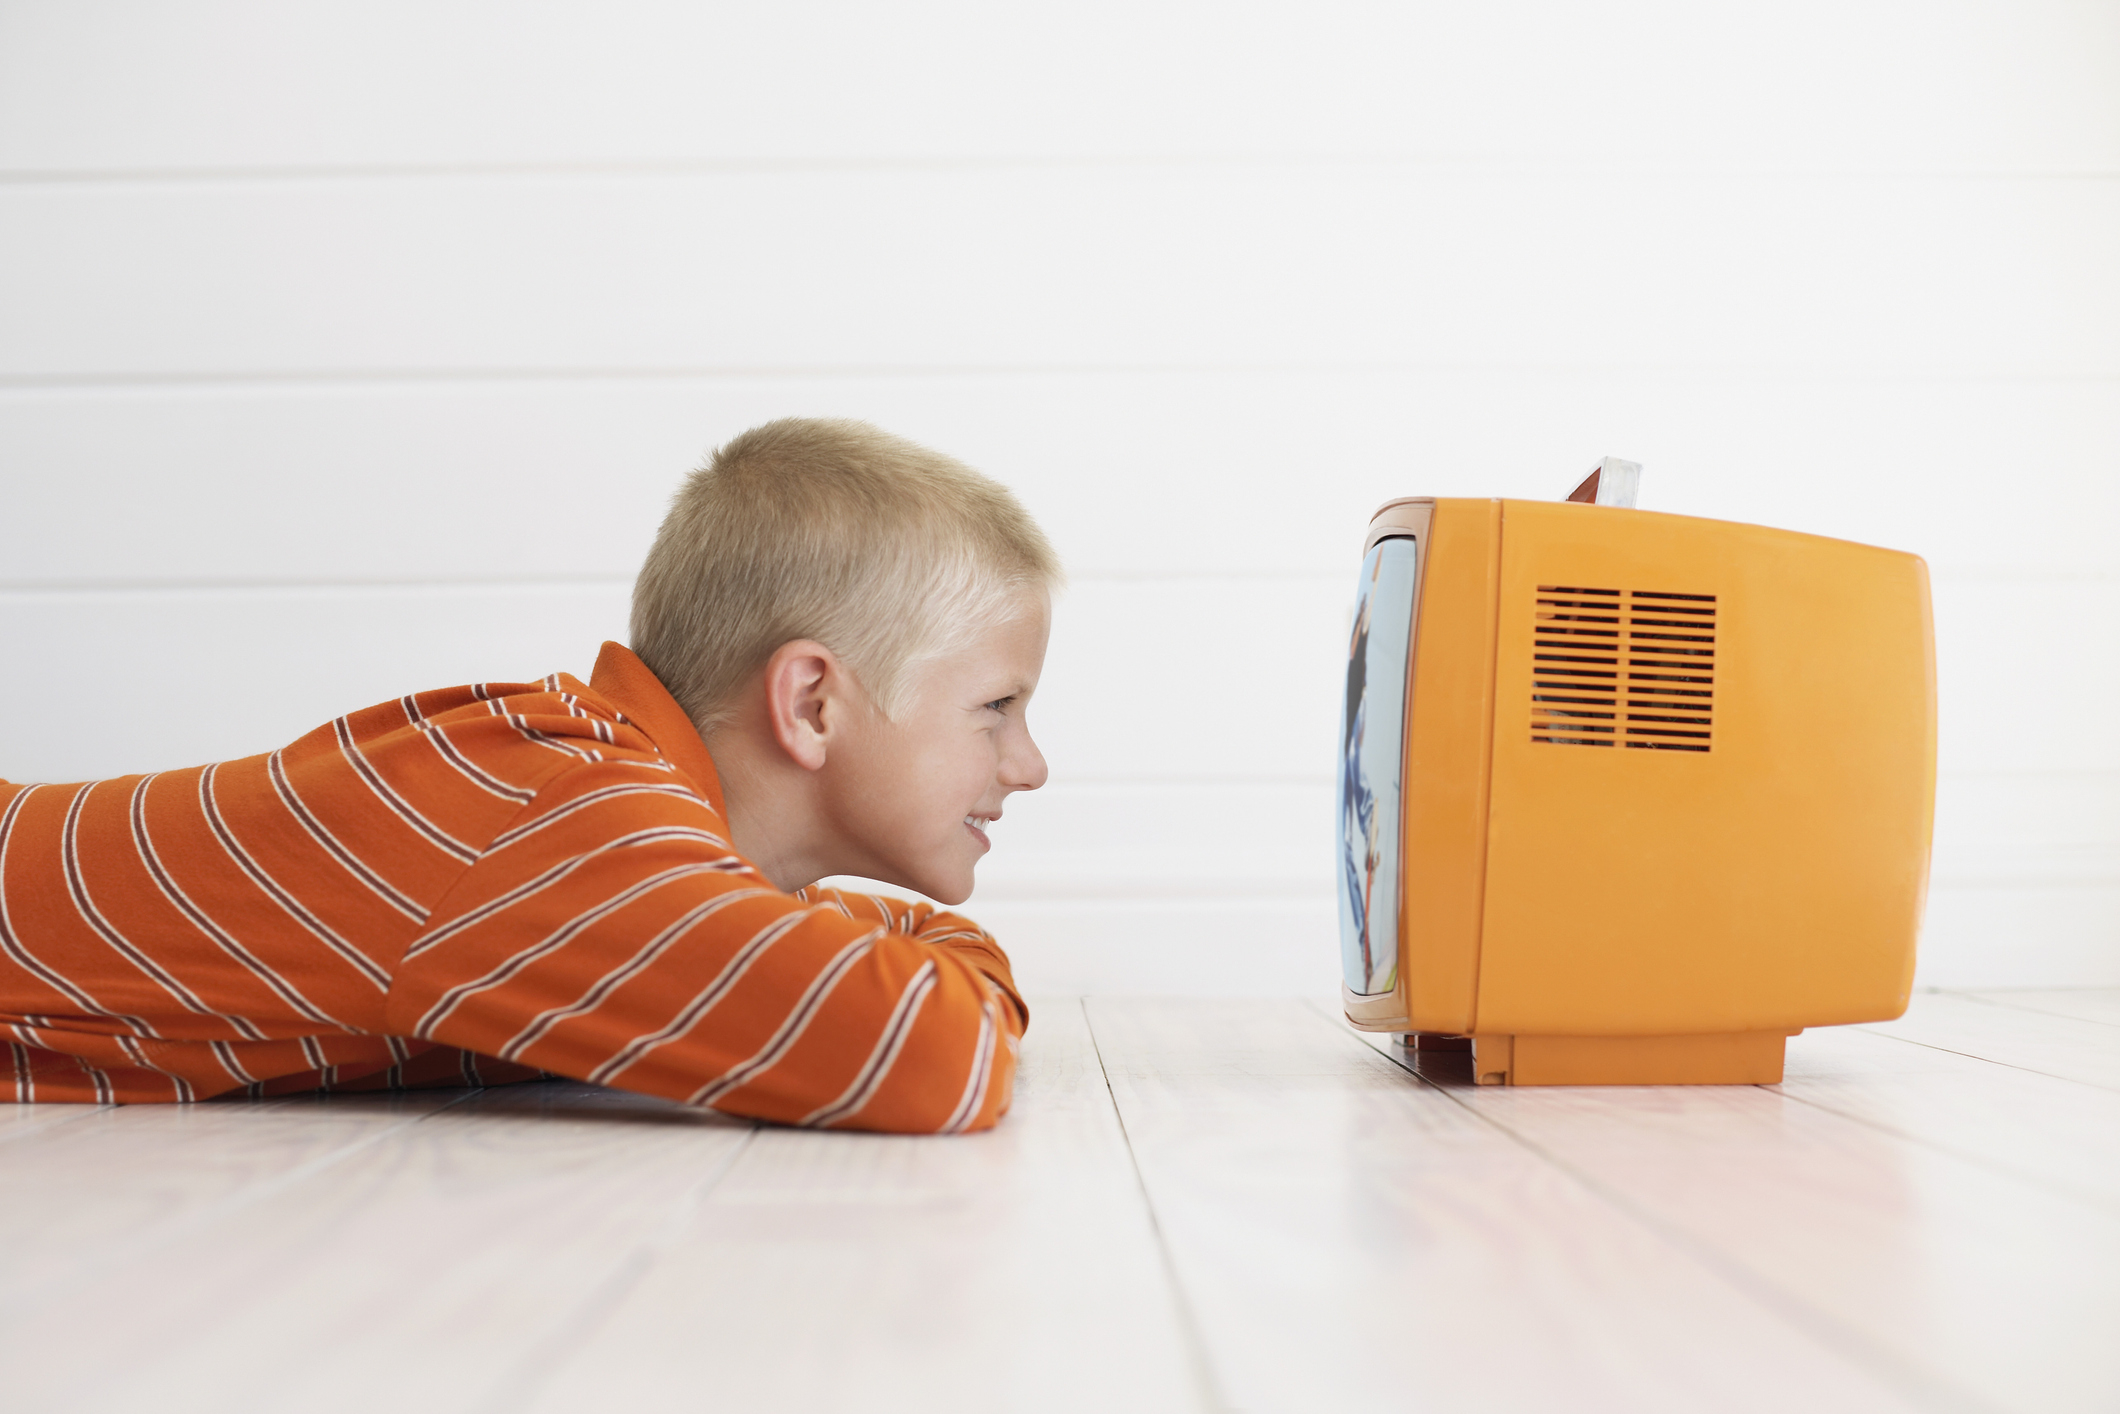 Child lying on their stomach on the floor and watching a small TV about 5 inches from their face